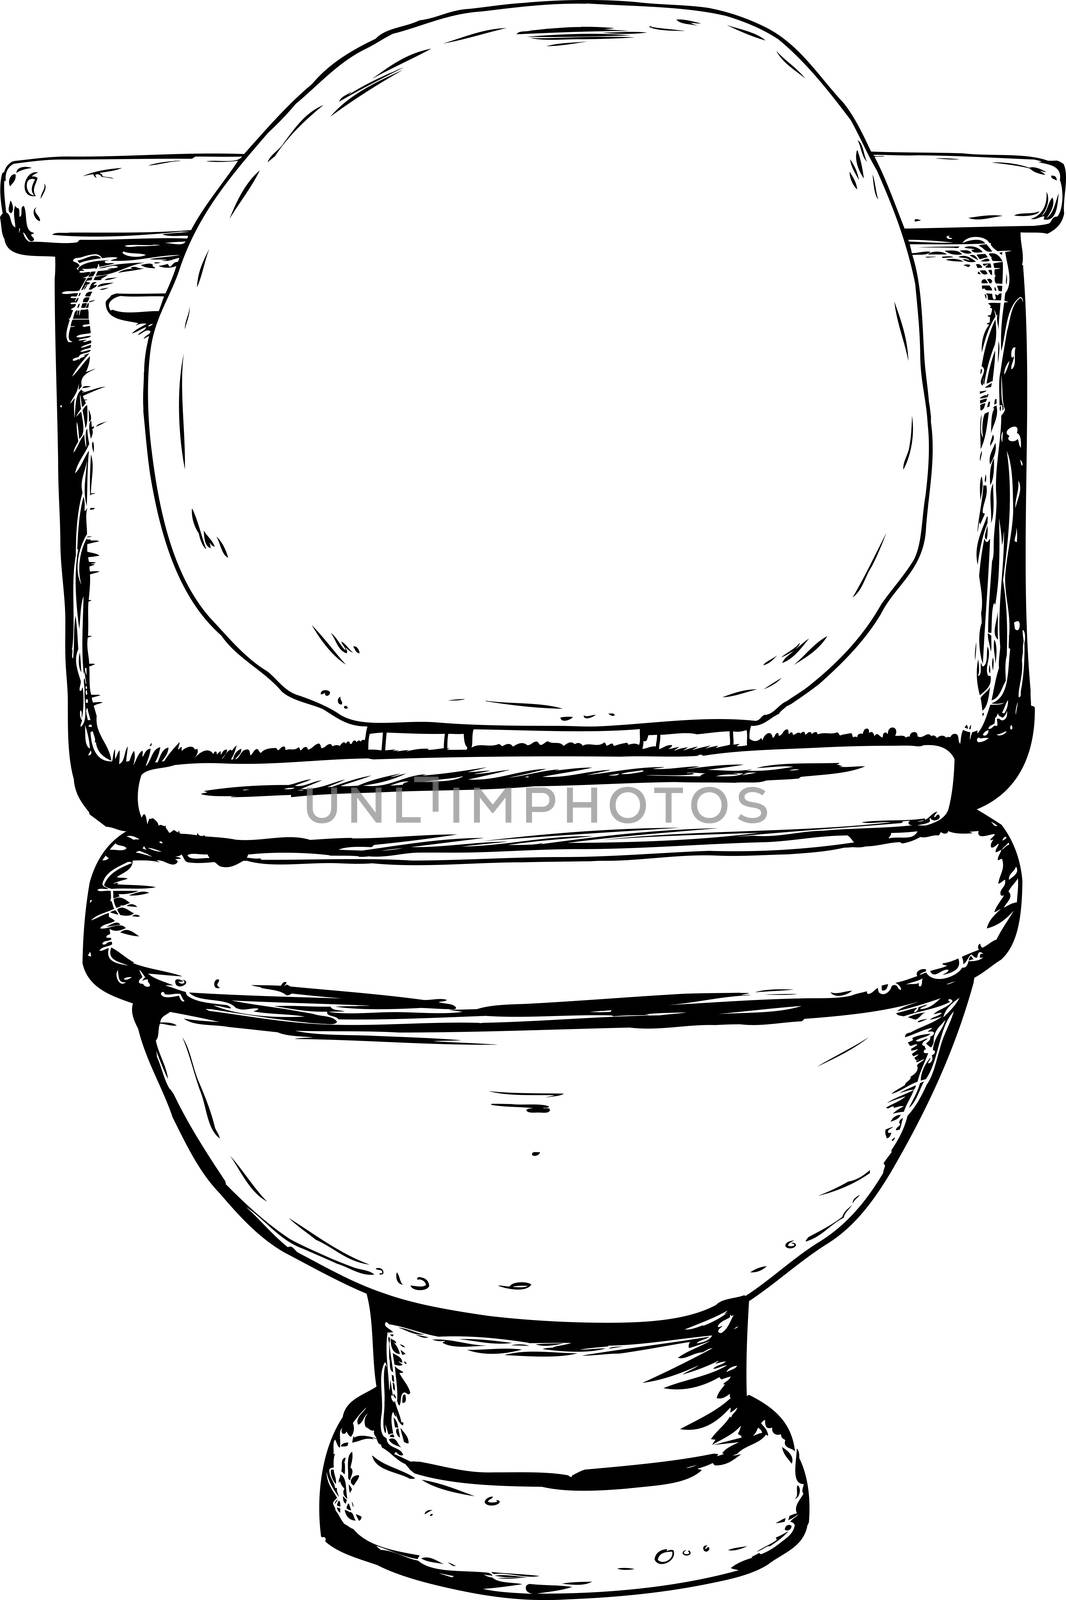 Single hand drawn outlined toilet with open lid from front view